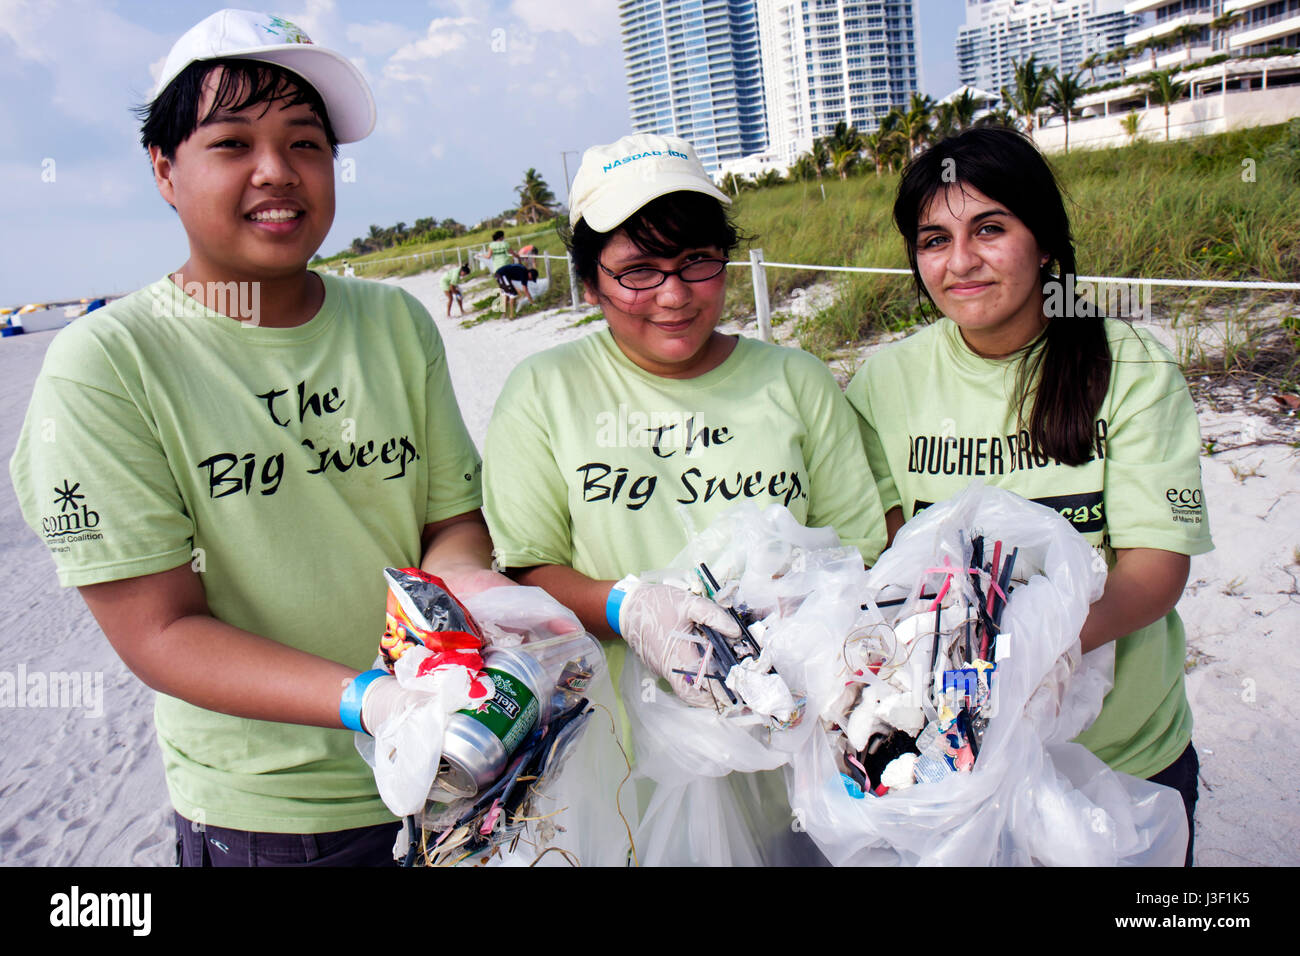 Miami Beach Florida,ECOMB,Environmental Coalition of,Miami Beach,Big Sweep,nettoyage de plage,étudiants bénévoles bénévoles bénévoles bénévoles worke travail Banque D'Images